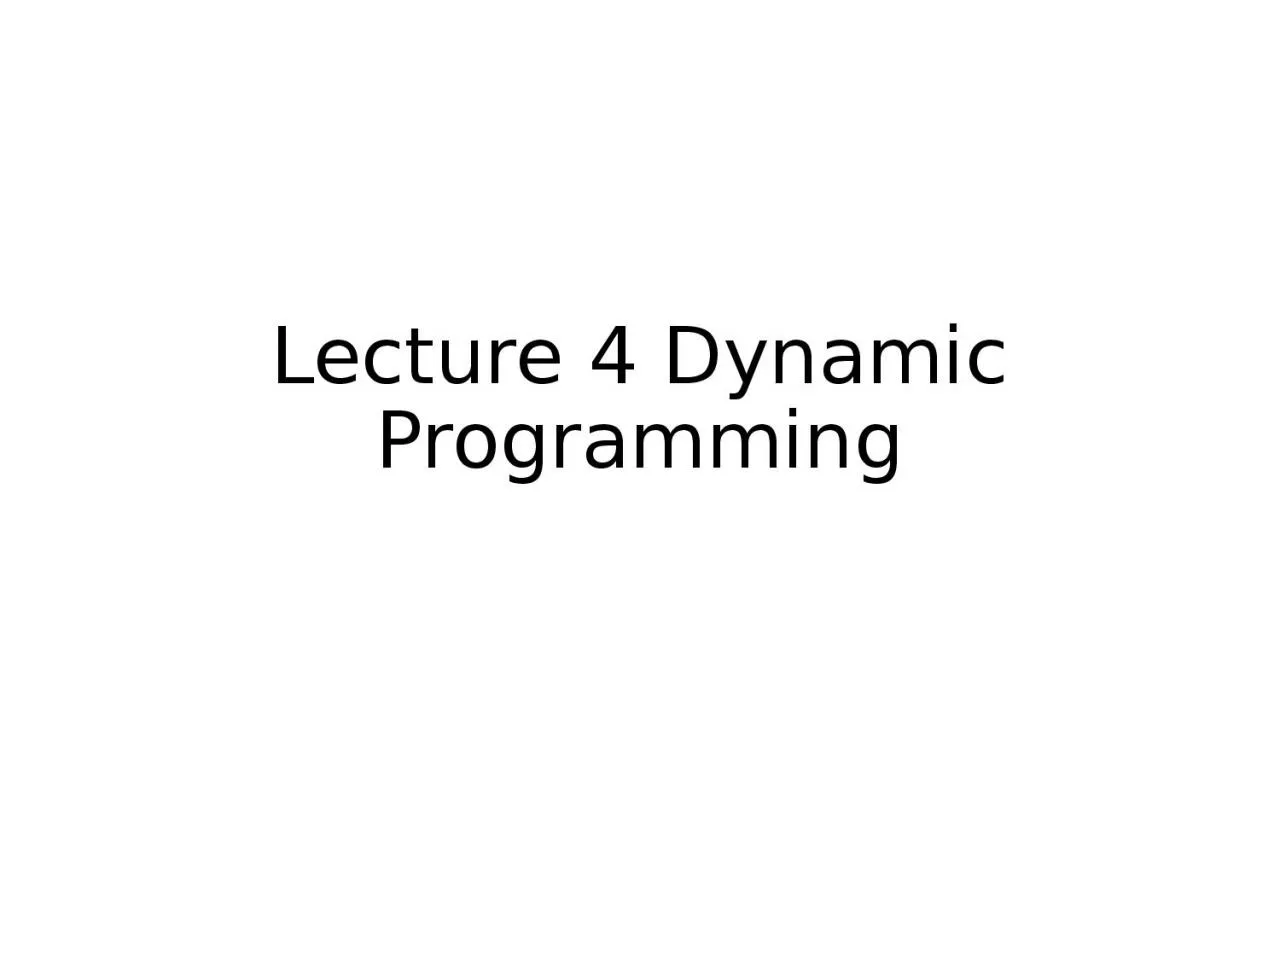 Lecture 4 Dynamic Programming